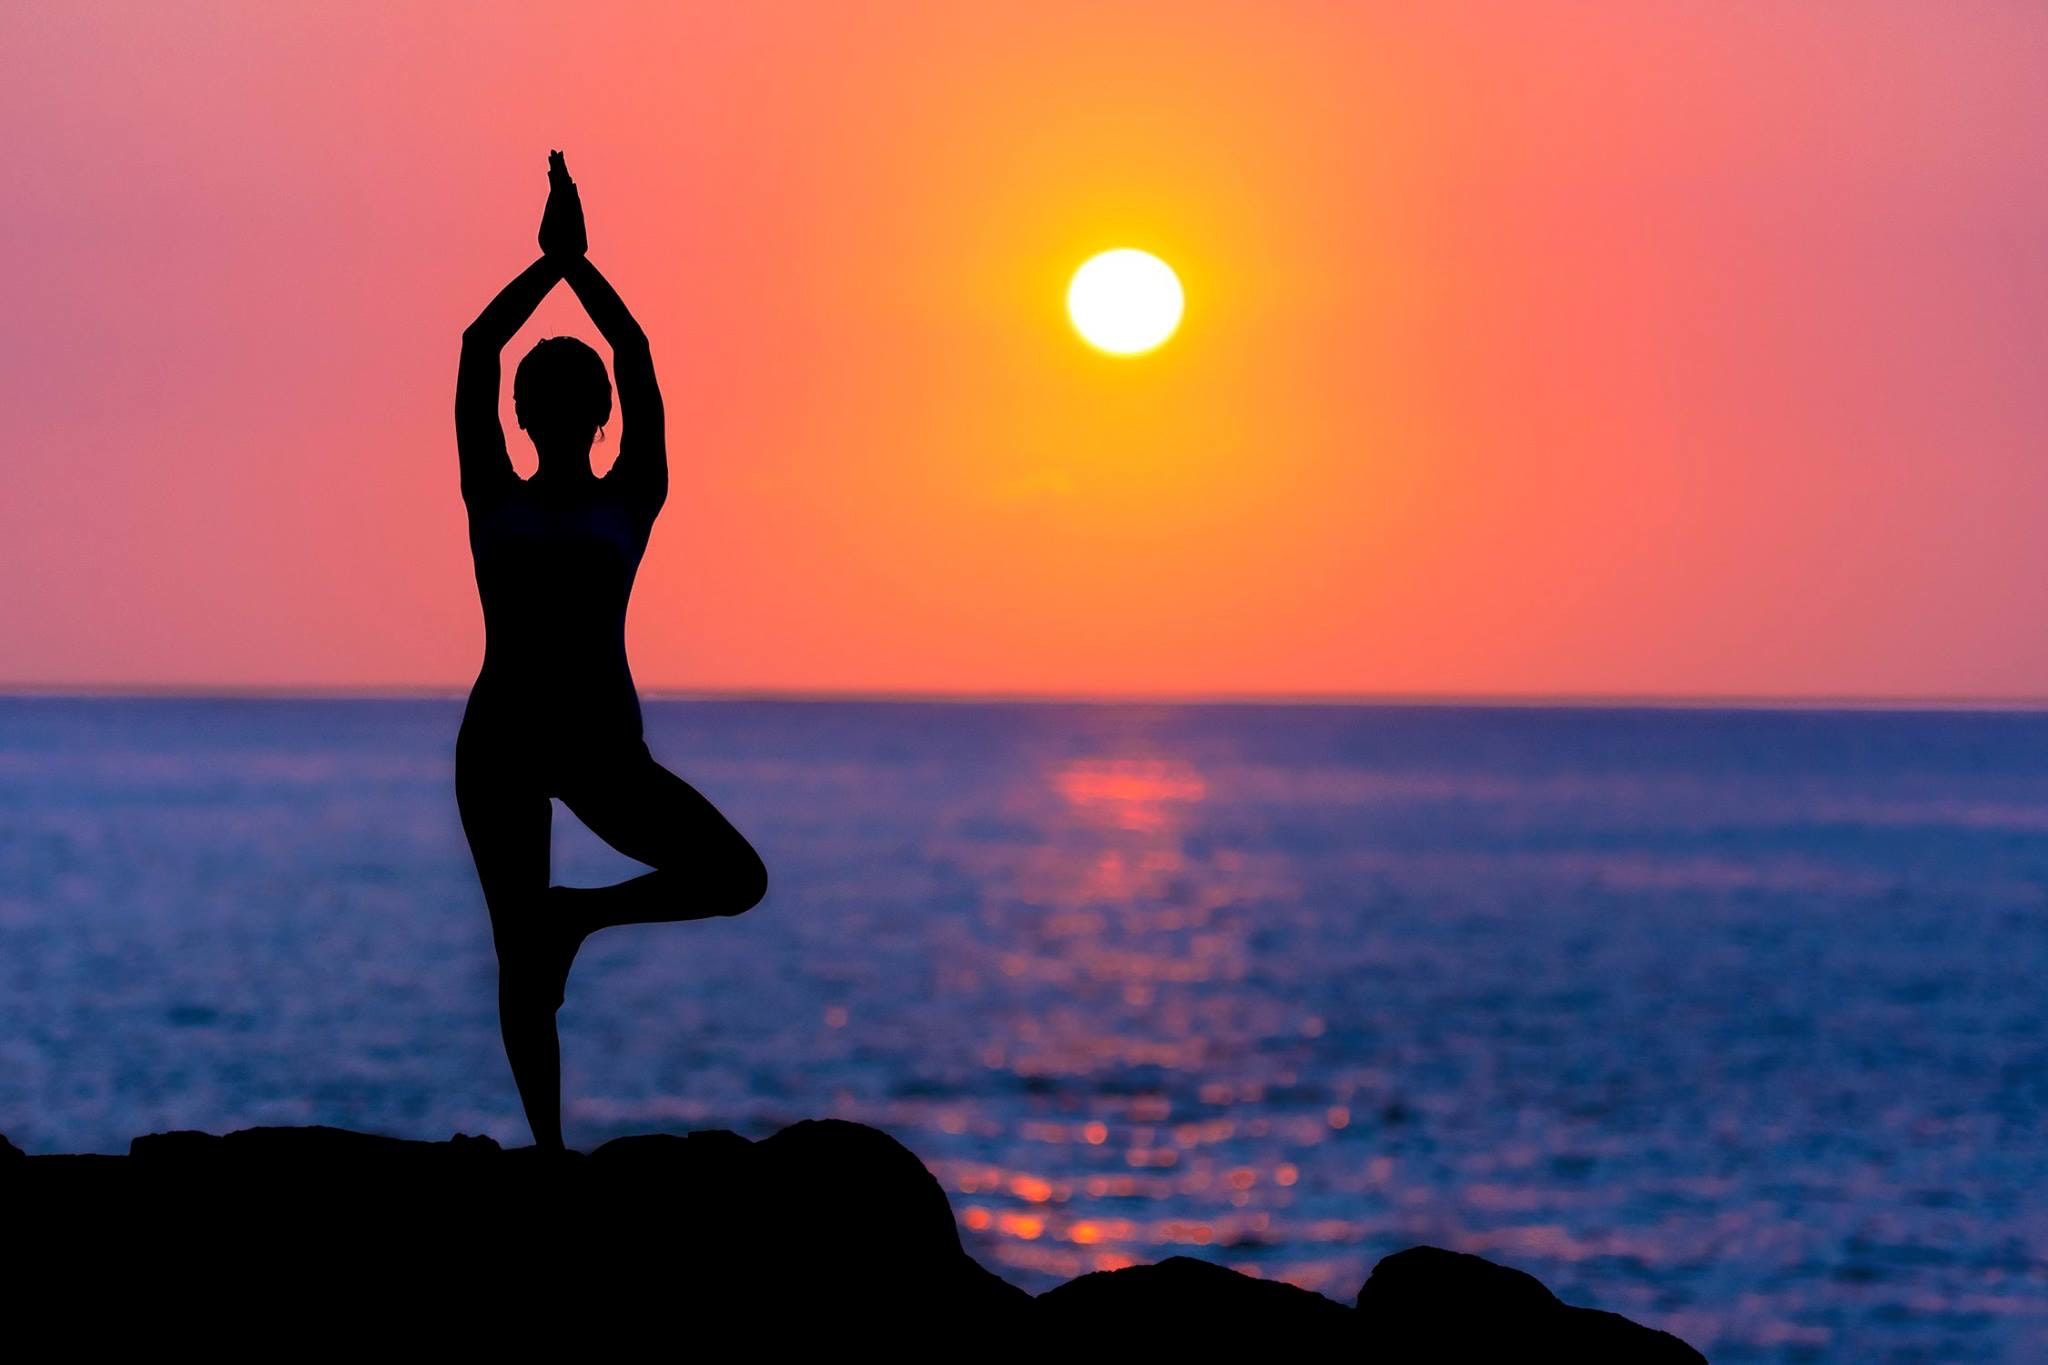 Staying fit by practicing yoga has many health benefits